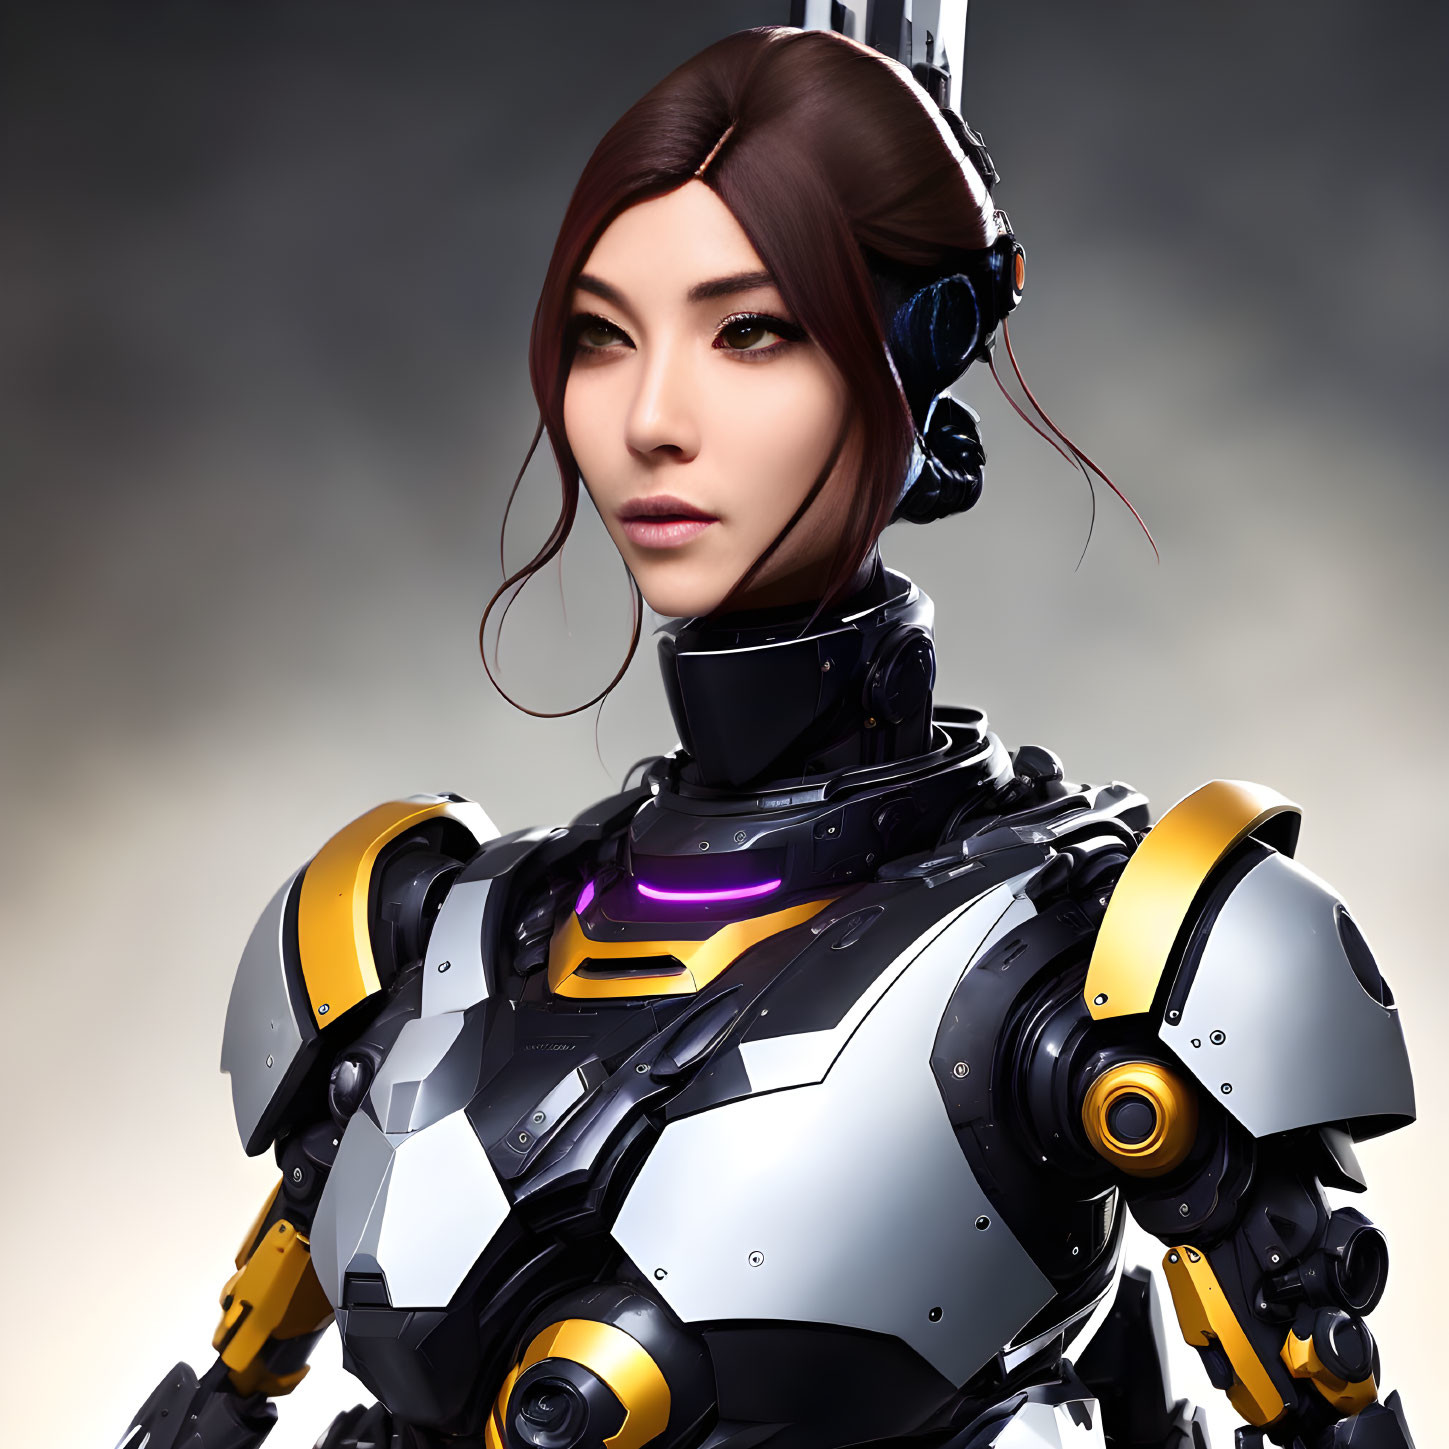 Female Android in Futuristic Armor Suit with Human Face and Headset